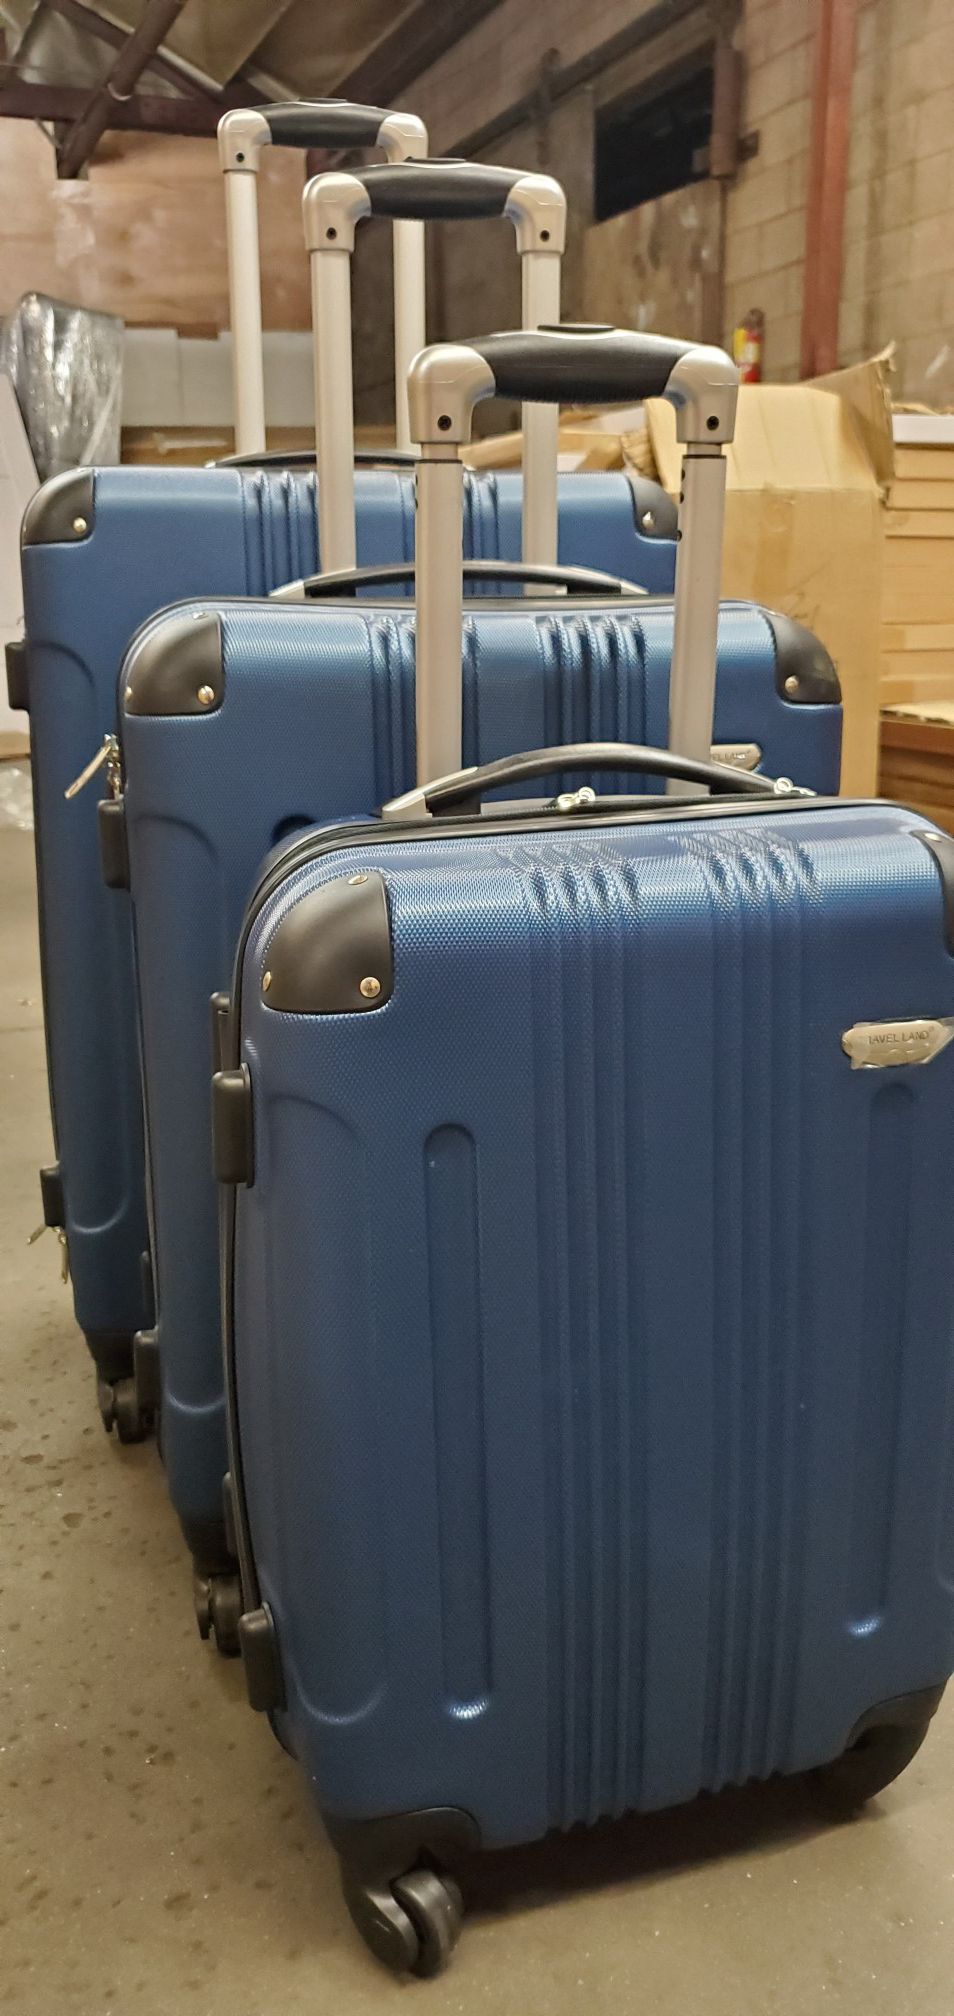 New Luggages Suitcases